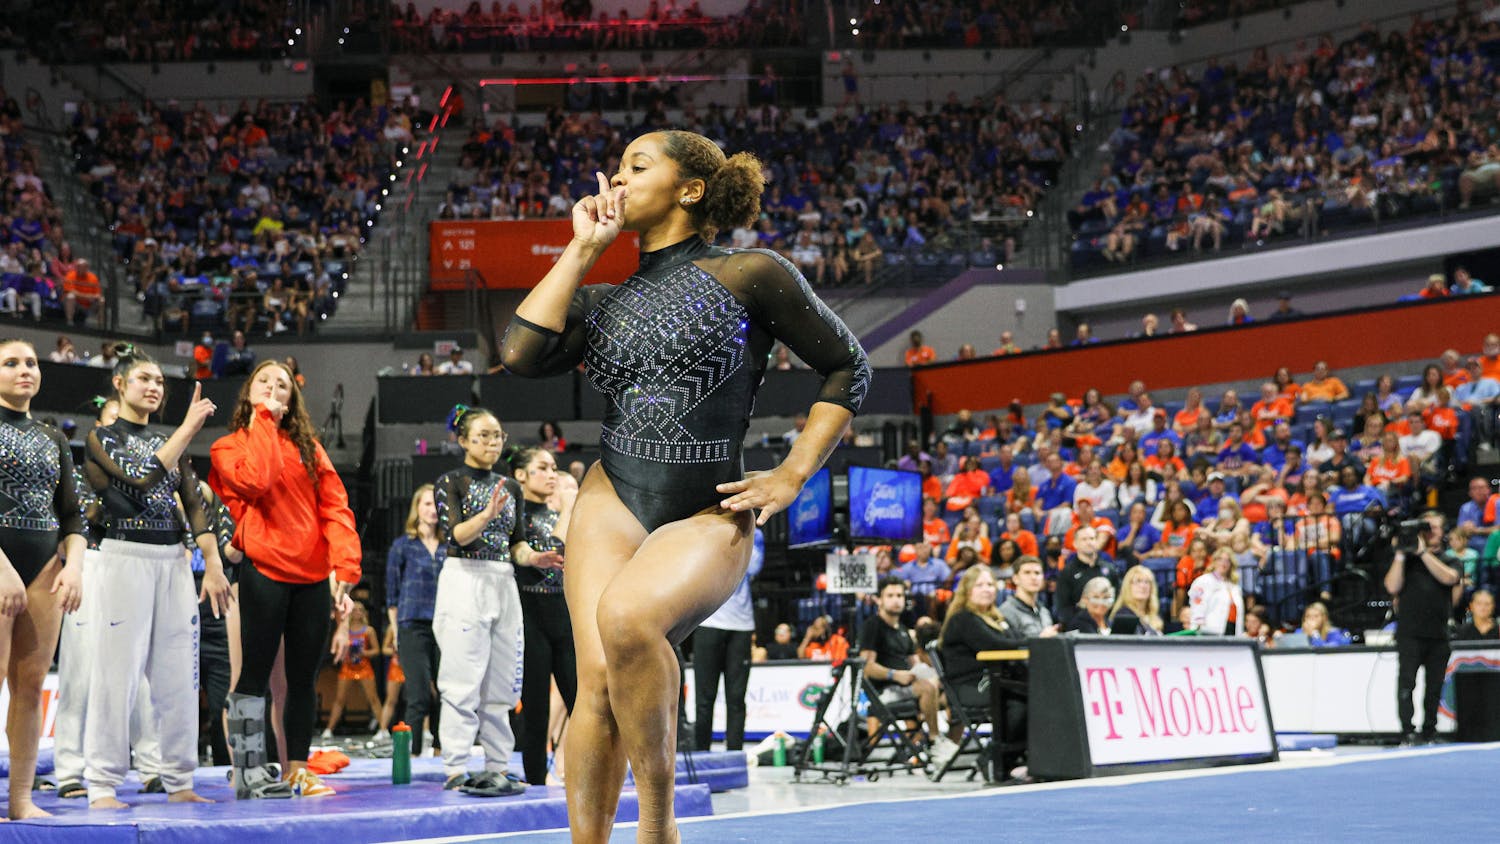 Florida gymnast Sloane Blakely performs her floor routine in the Gators’ meet against the No. 12 Kentucky Wildcats Friday, Feb. 24, 2023. UF clinched the SEC title with their victory.